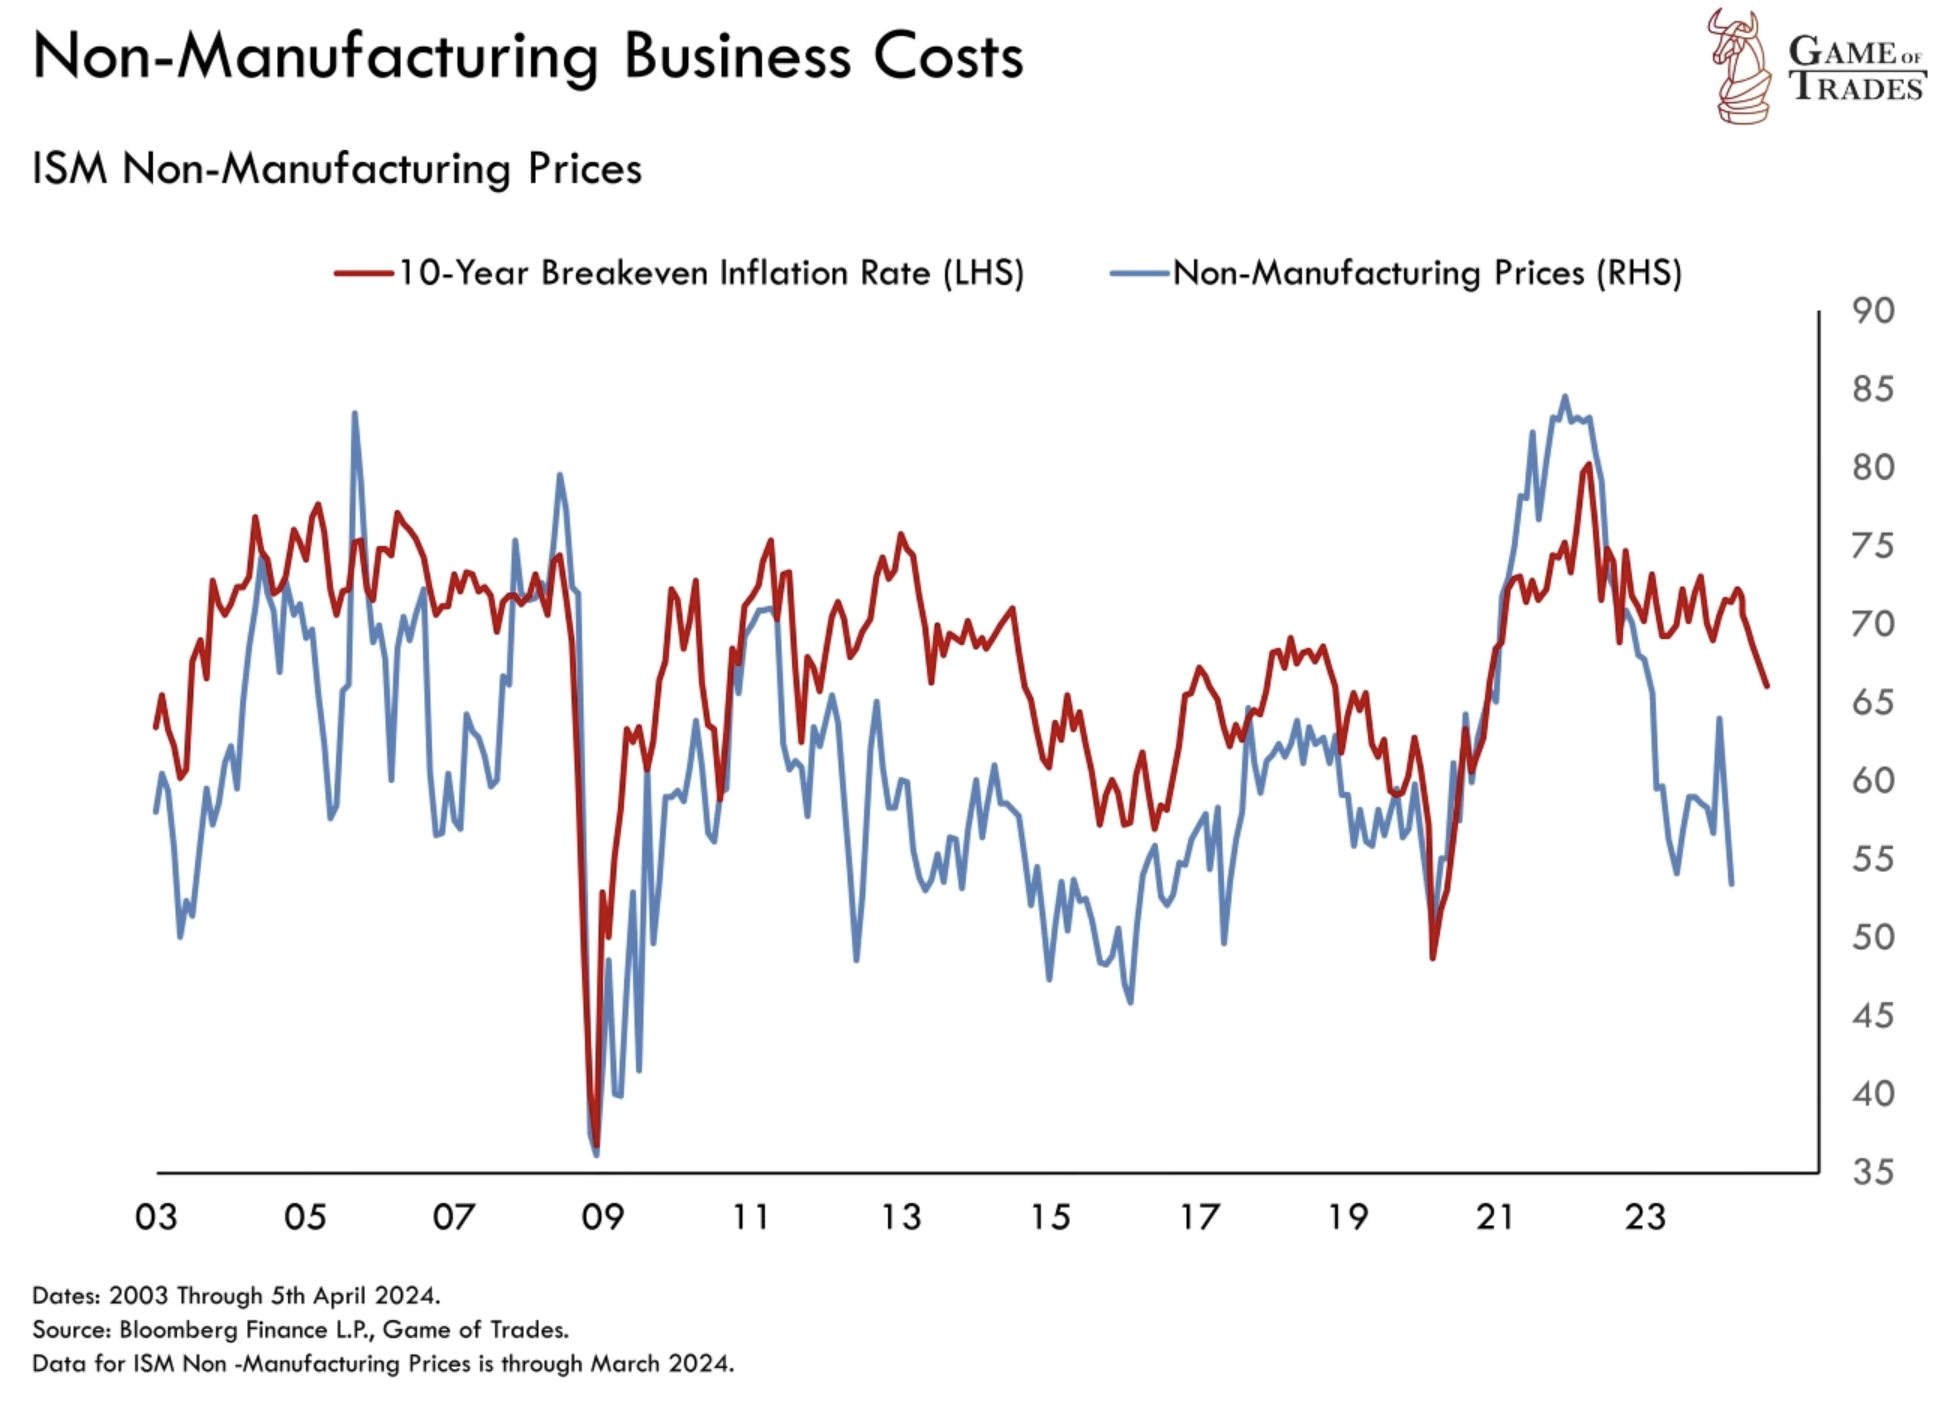 ISM non-manufacturing prices